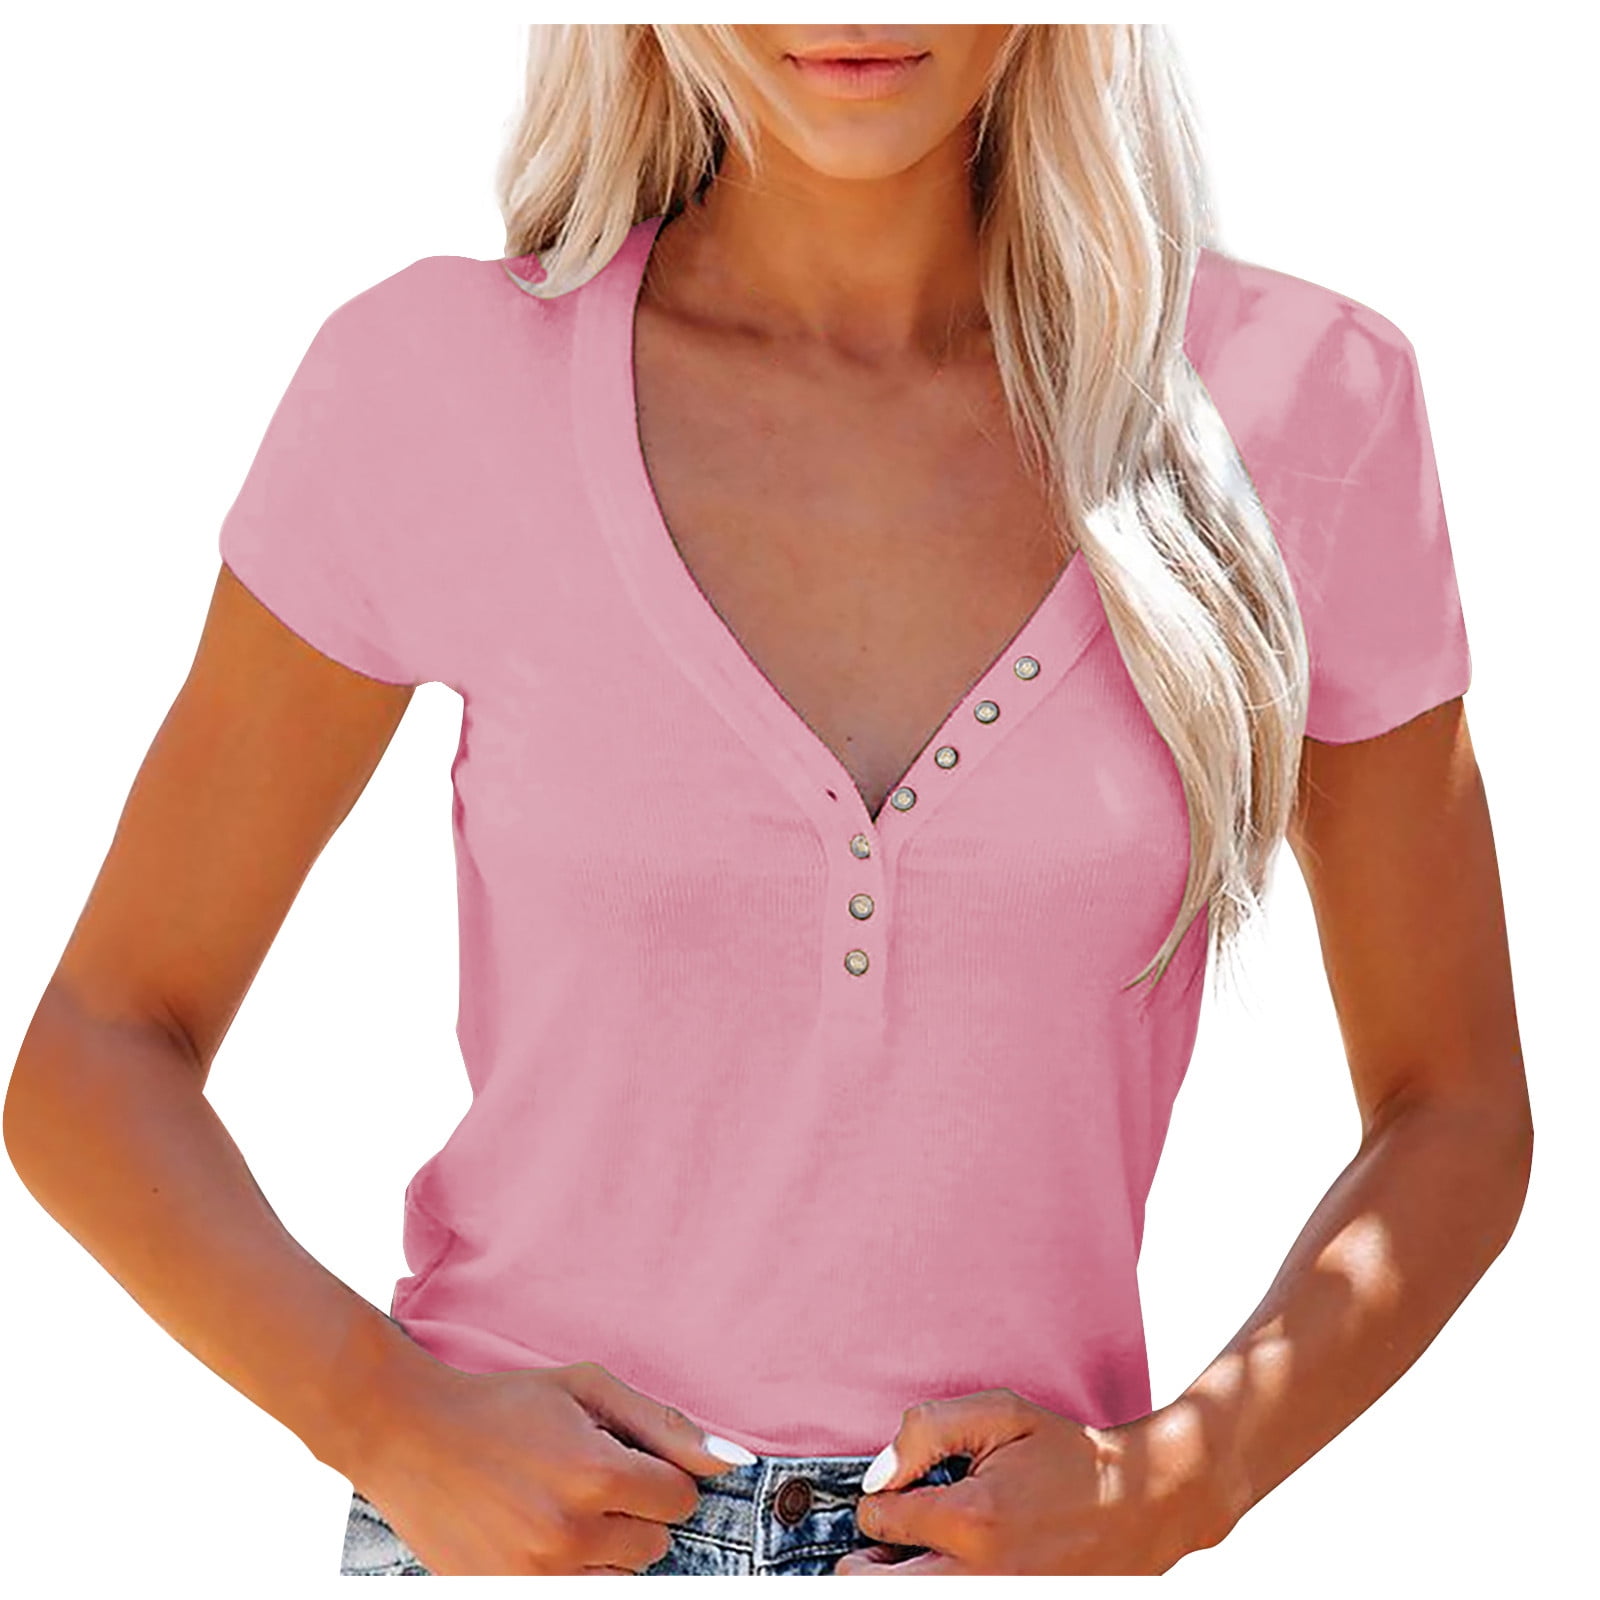 YYDGH Women's Summer Casual Henley Shirts Short Sleeve V Neck Button Up  Ribbed Slim Fit Basic Tops Pink XXL 